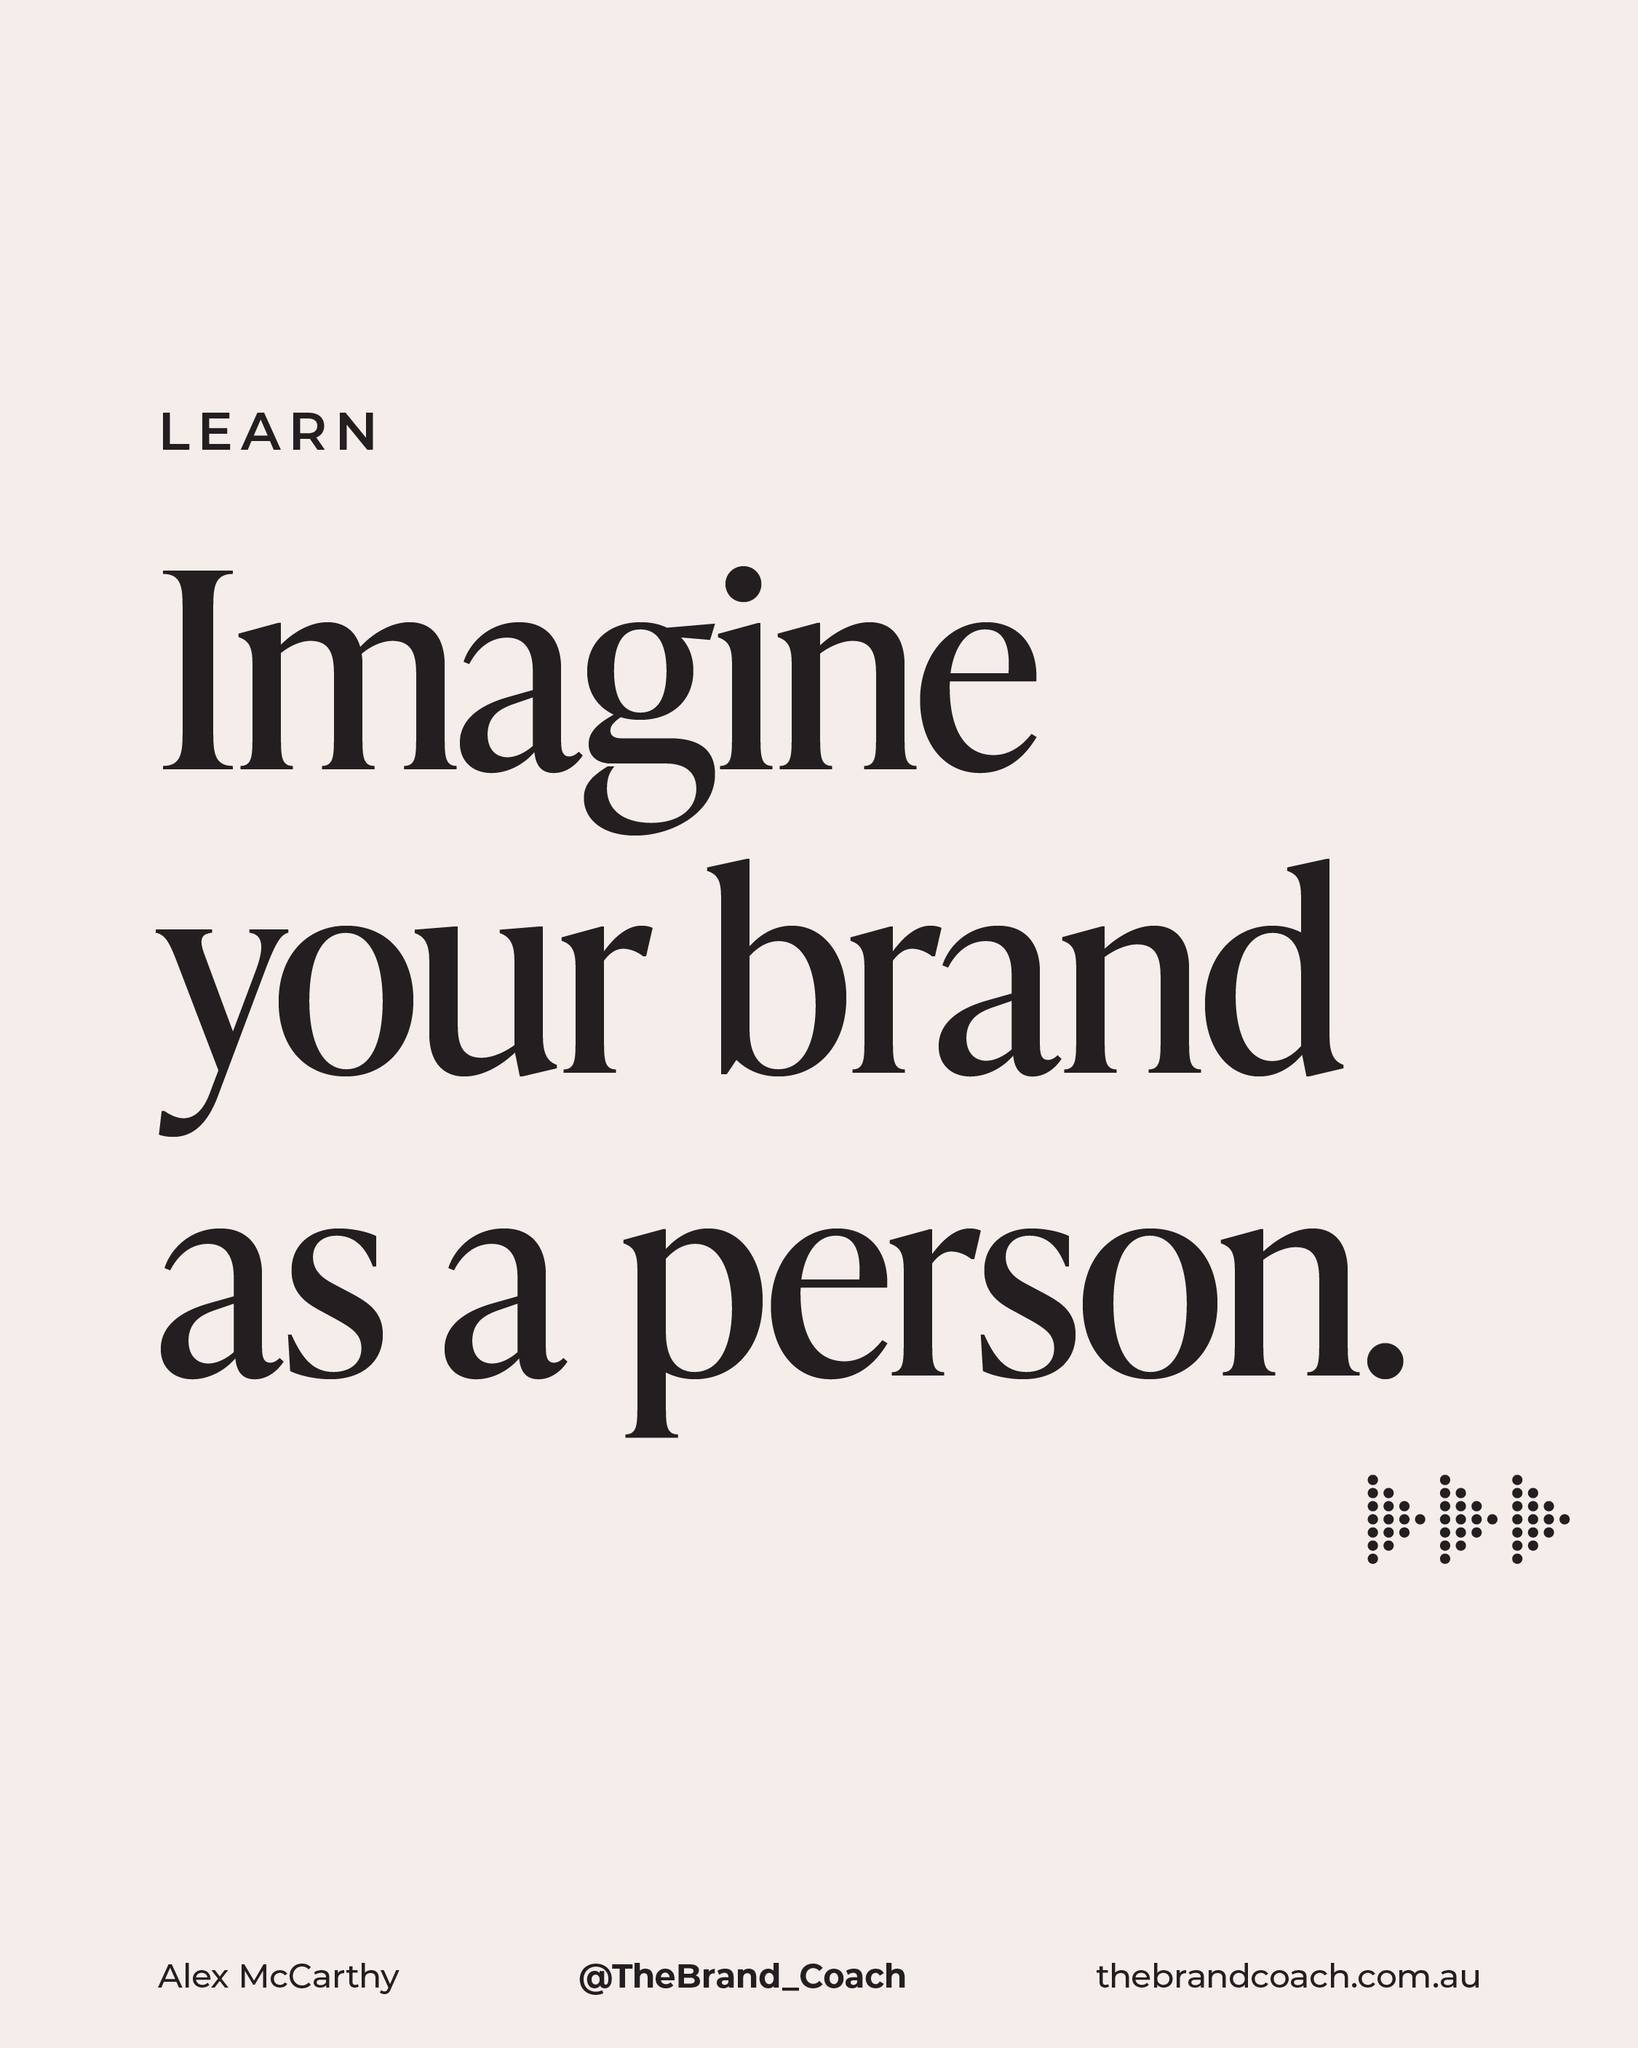 Need a hand defining your brand's personality? Let's team up ✨

Book a coaching session with me, and in just 60 minutes, we'll bring out the best in your brand 💅

#brandcoaching #branding101 #smallbusinesstips